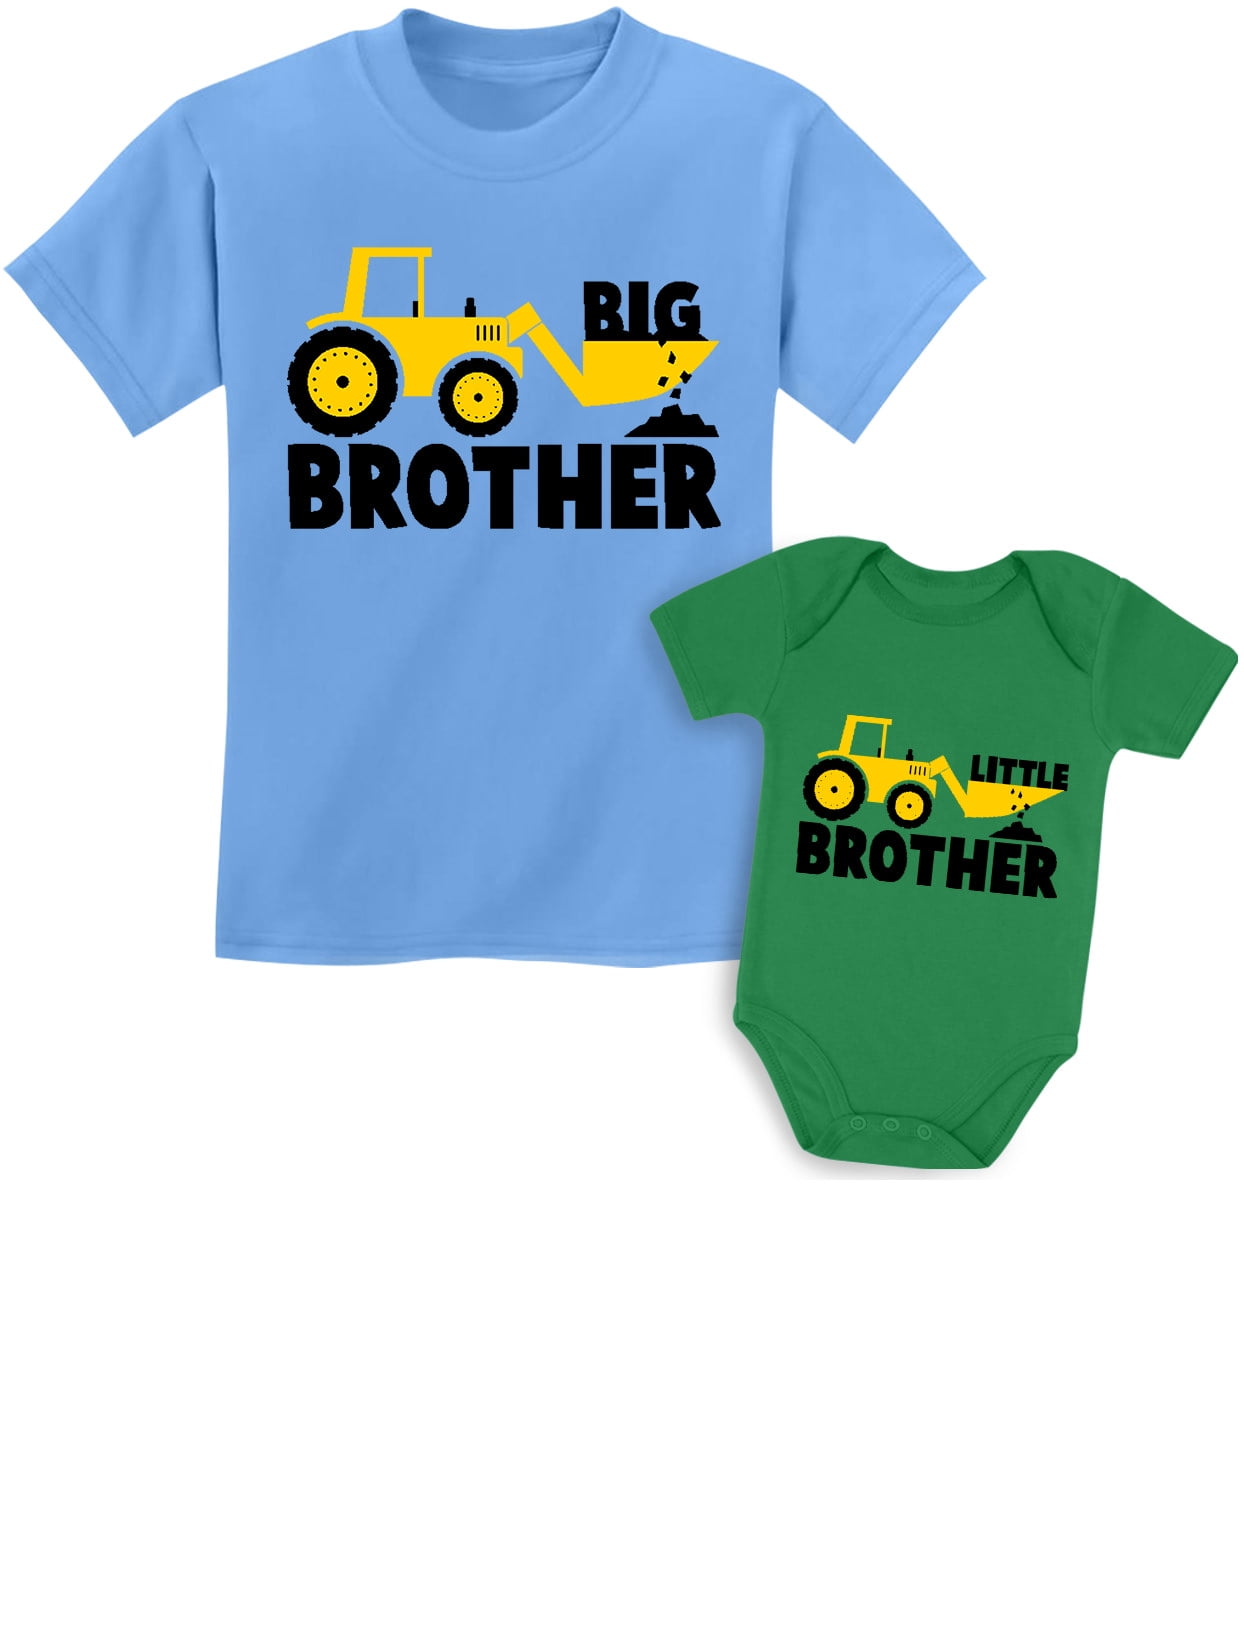 Big Brother Shirt - Kids Big Brother Fish T Shirt - Gift Friendly - Polycotton Blended Tee - Multiple Colors Available - Fishing Boys Shirt